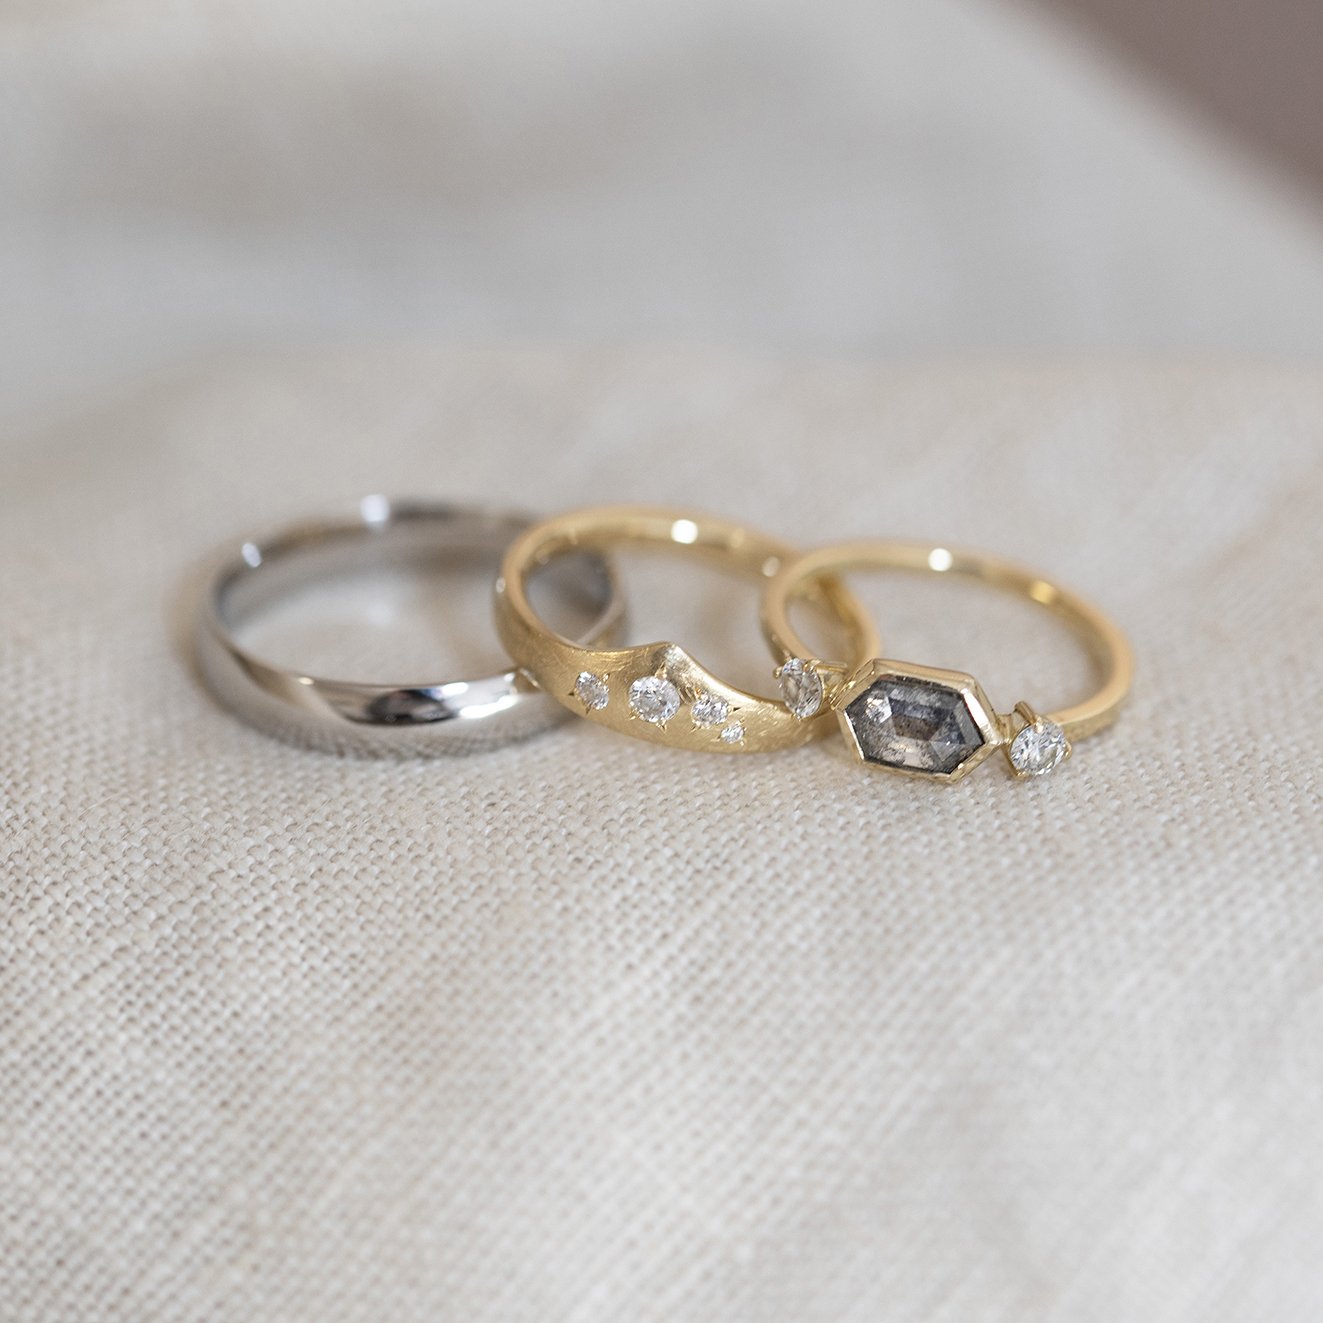  Three wedding rings. One plain silver wedding band, a diamond embellished wishbone shaped engagement ring and a modern, slim gold band with a bespoke stone shape set within it. 